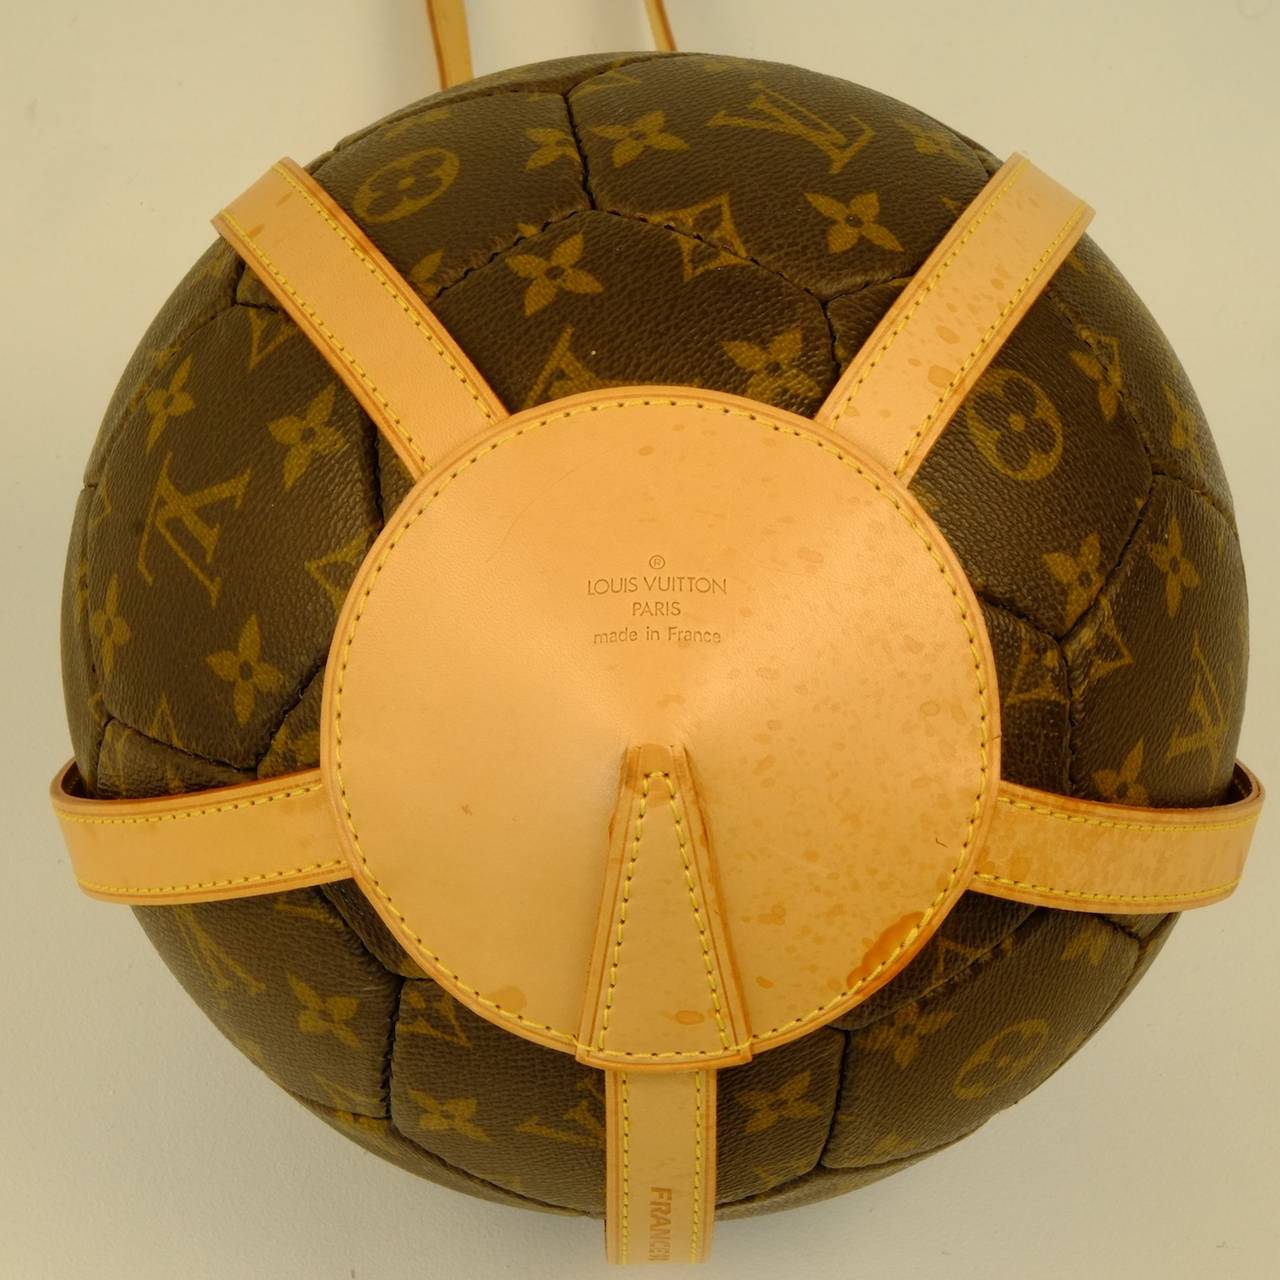 Sold at Auction: Louis Vuitton Limited Edition World Cup Soccer Football  1998